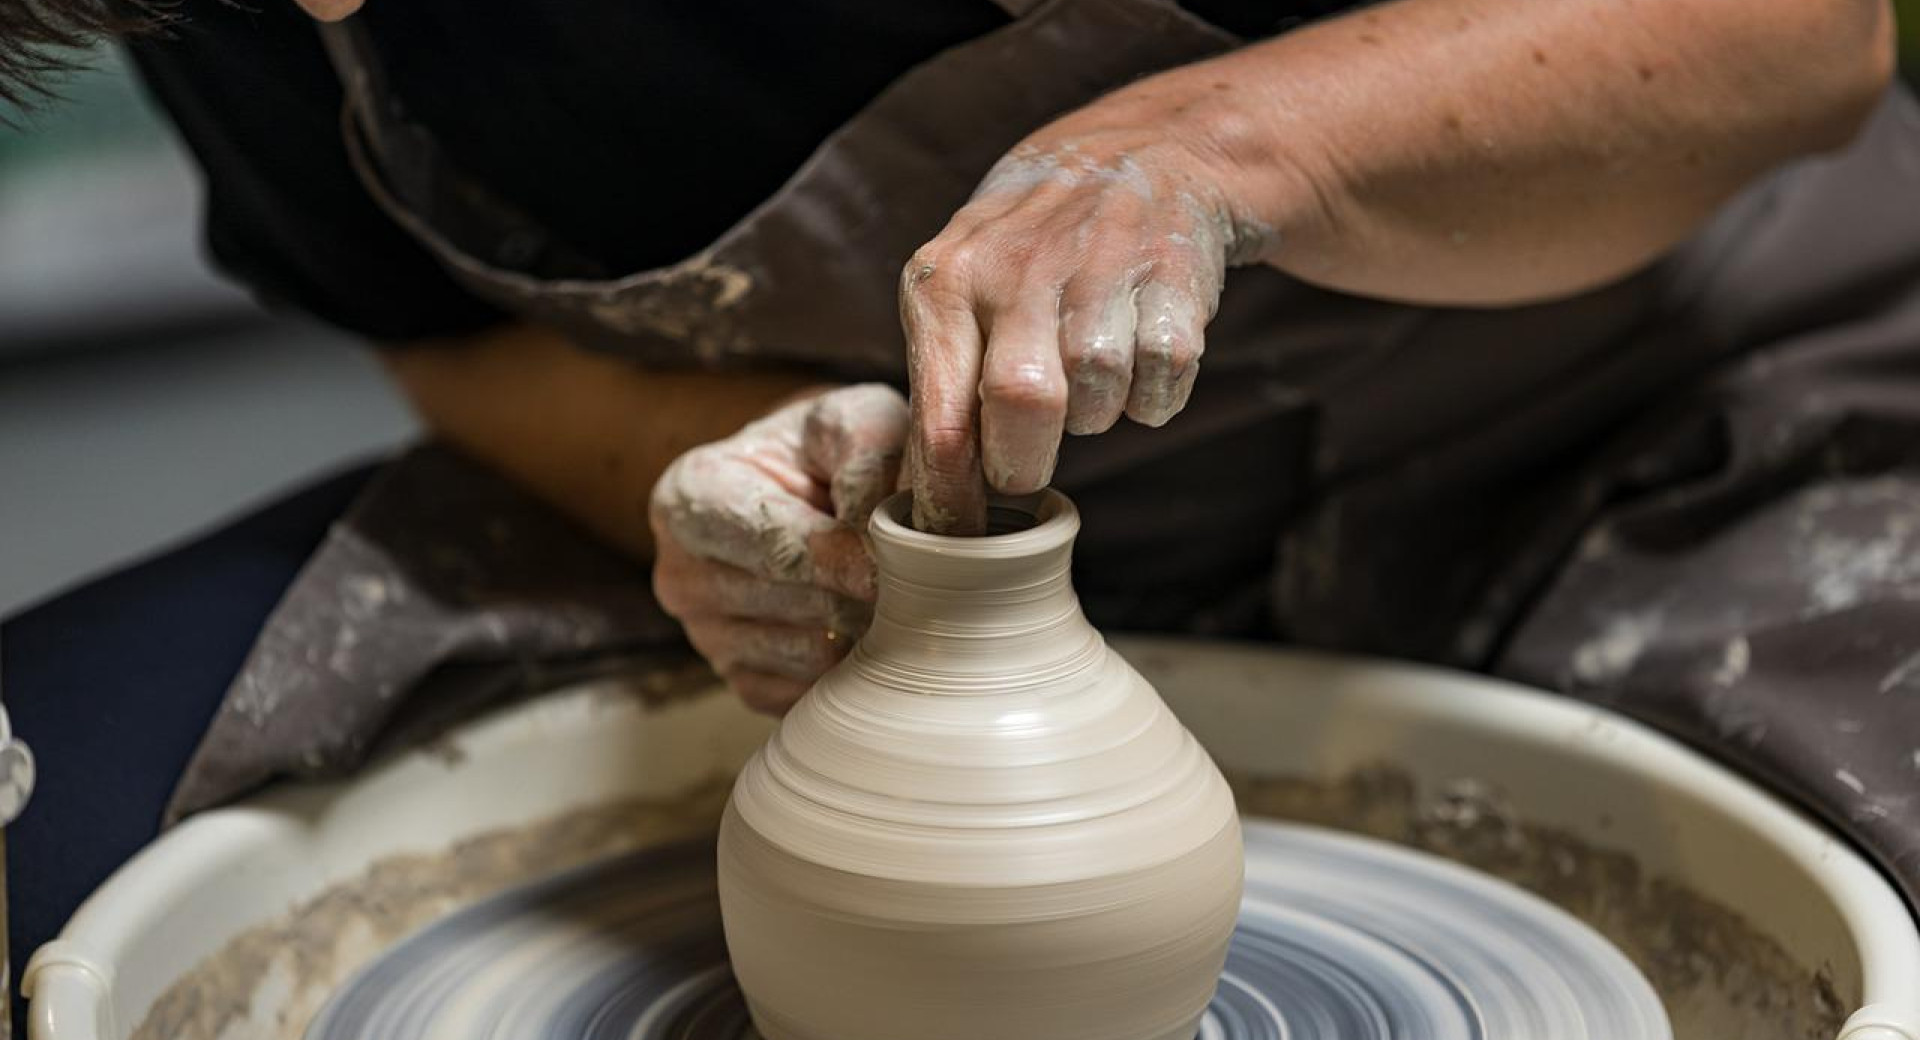 A woman is working on a pottery spindle.